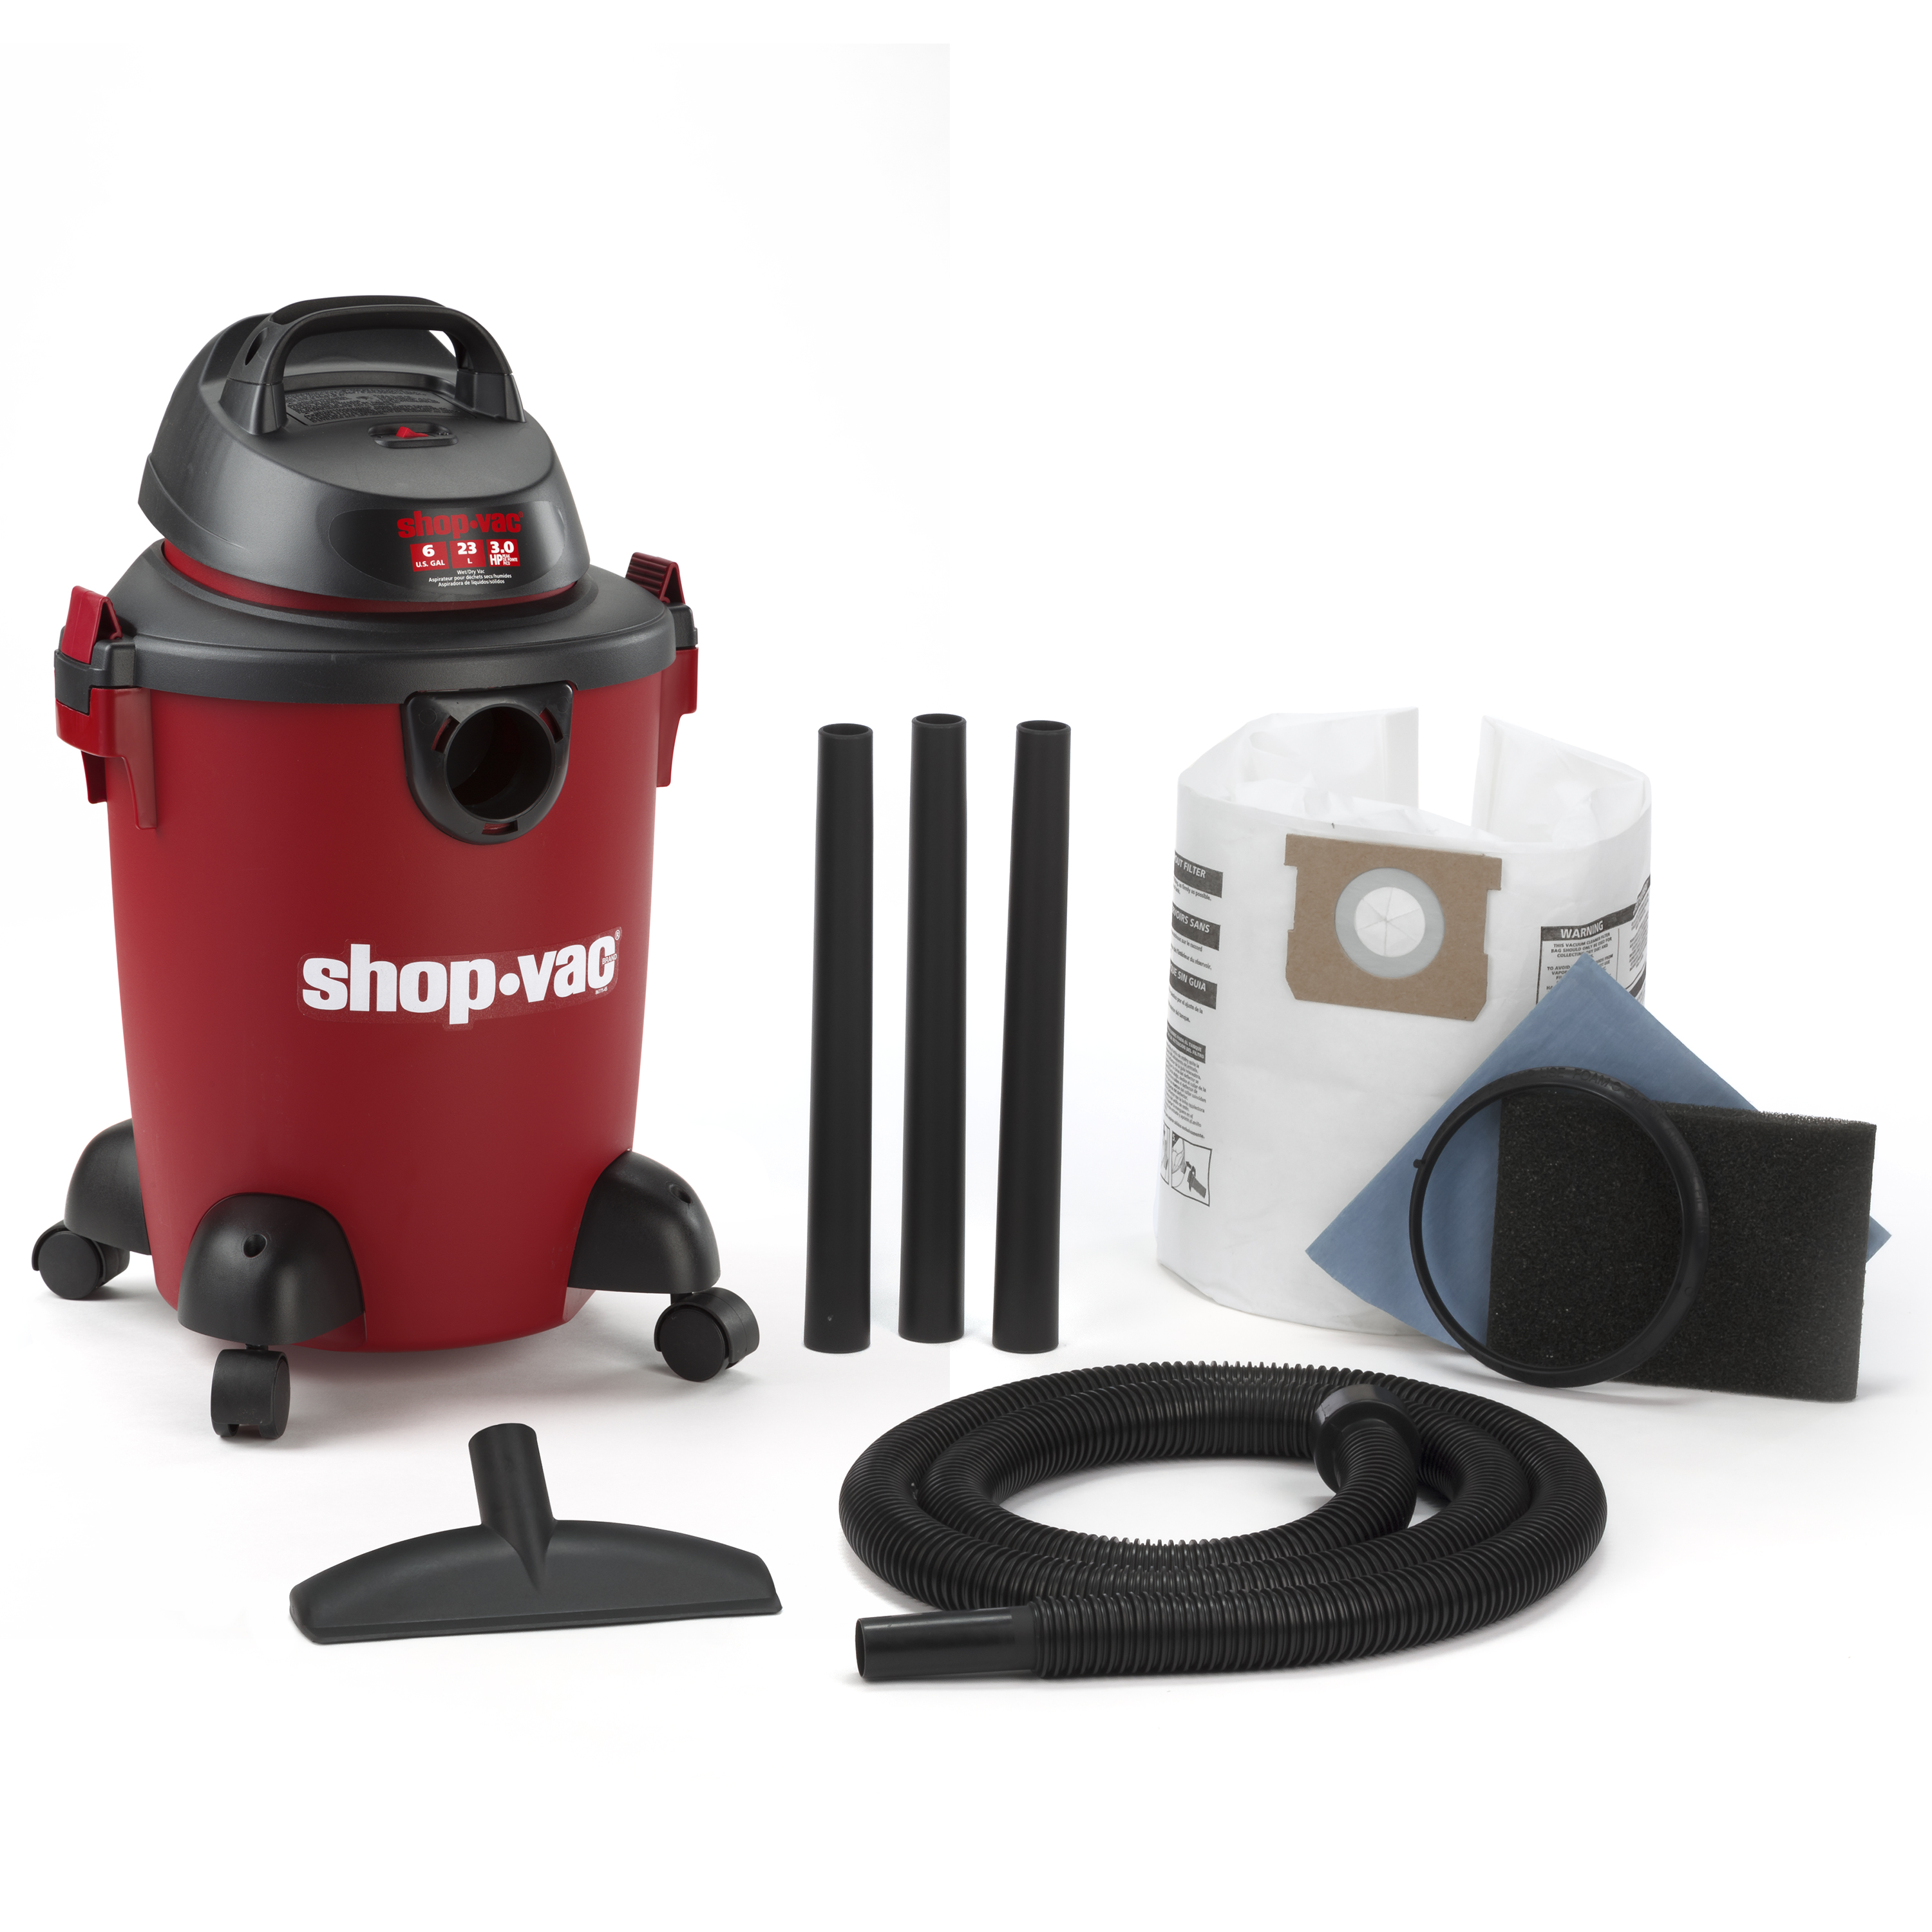 Shop-Vac 6 Gallon 3.0 Peak HP Wet / Dry Vacuum with Accessories and Casters - image 1 of 8